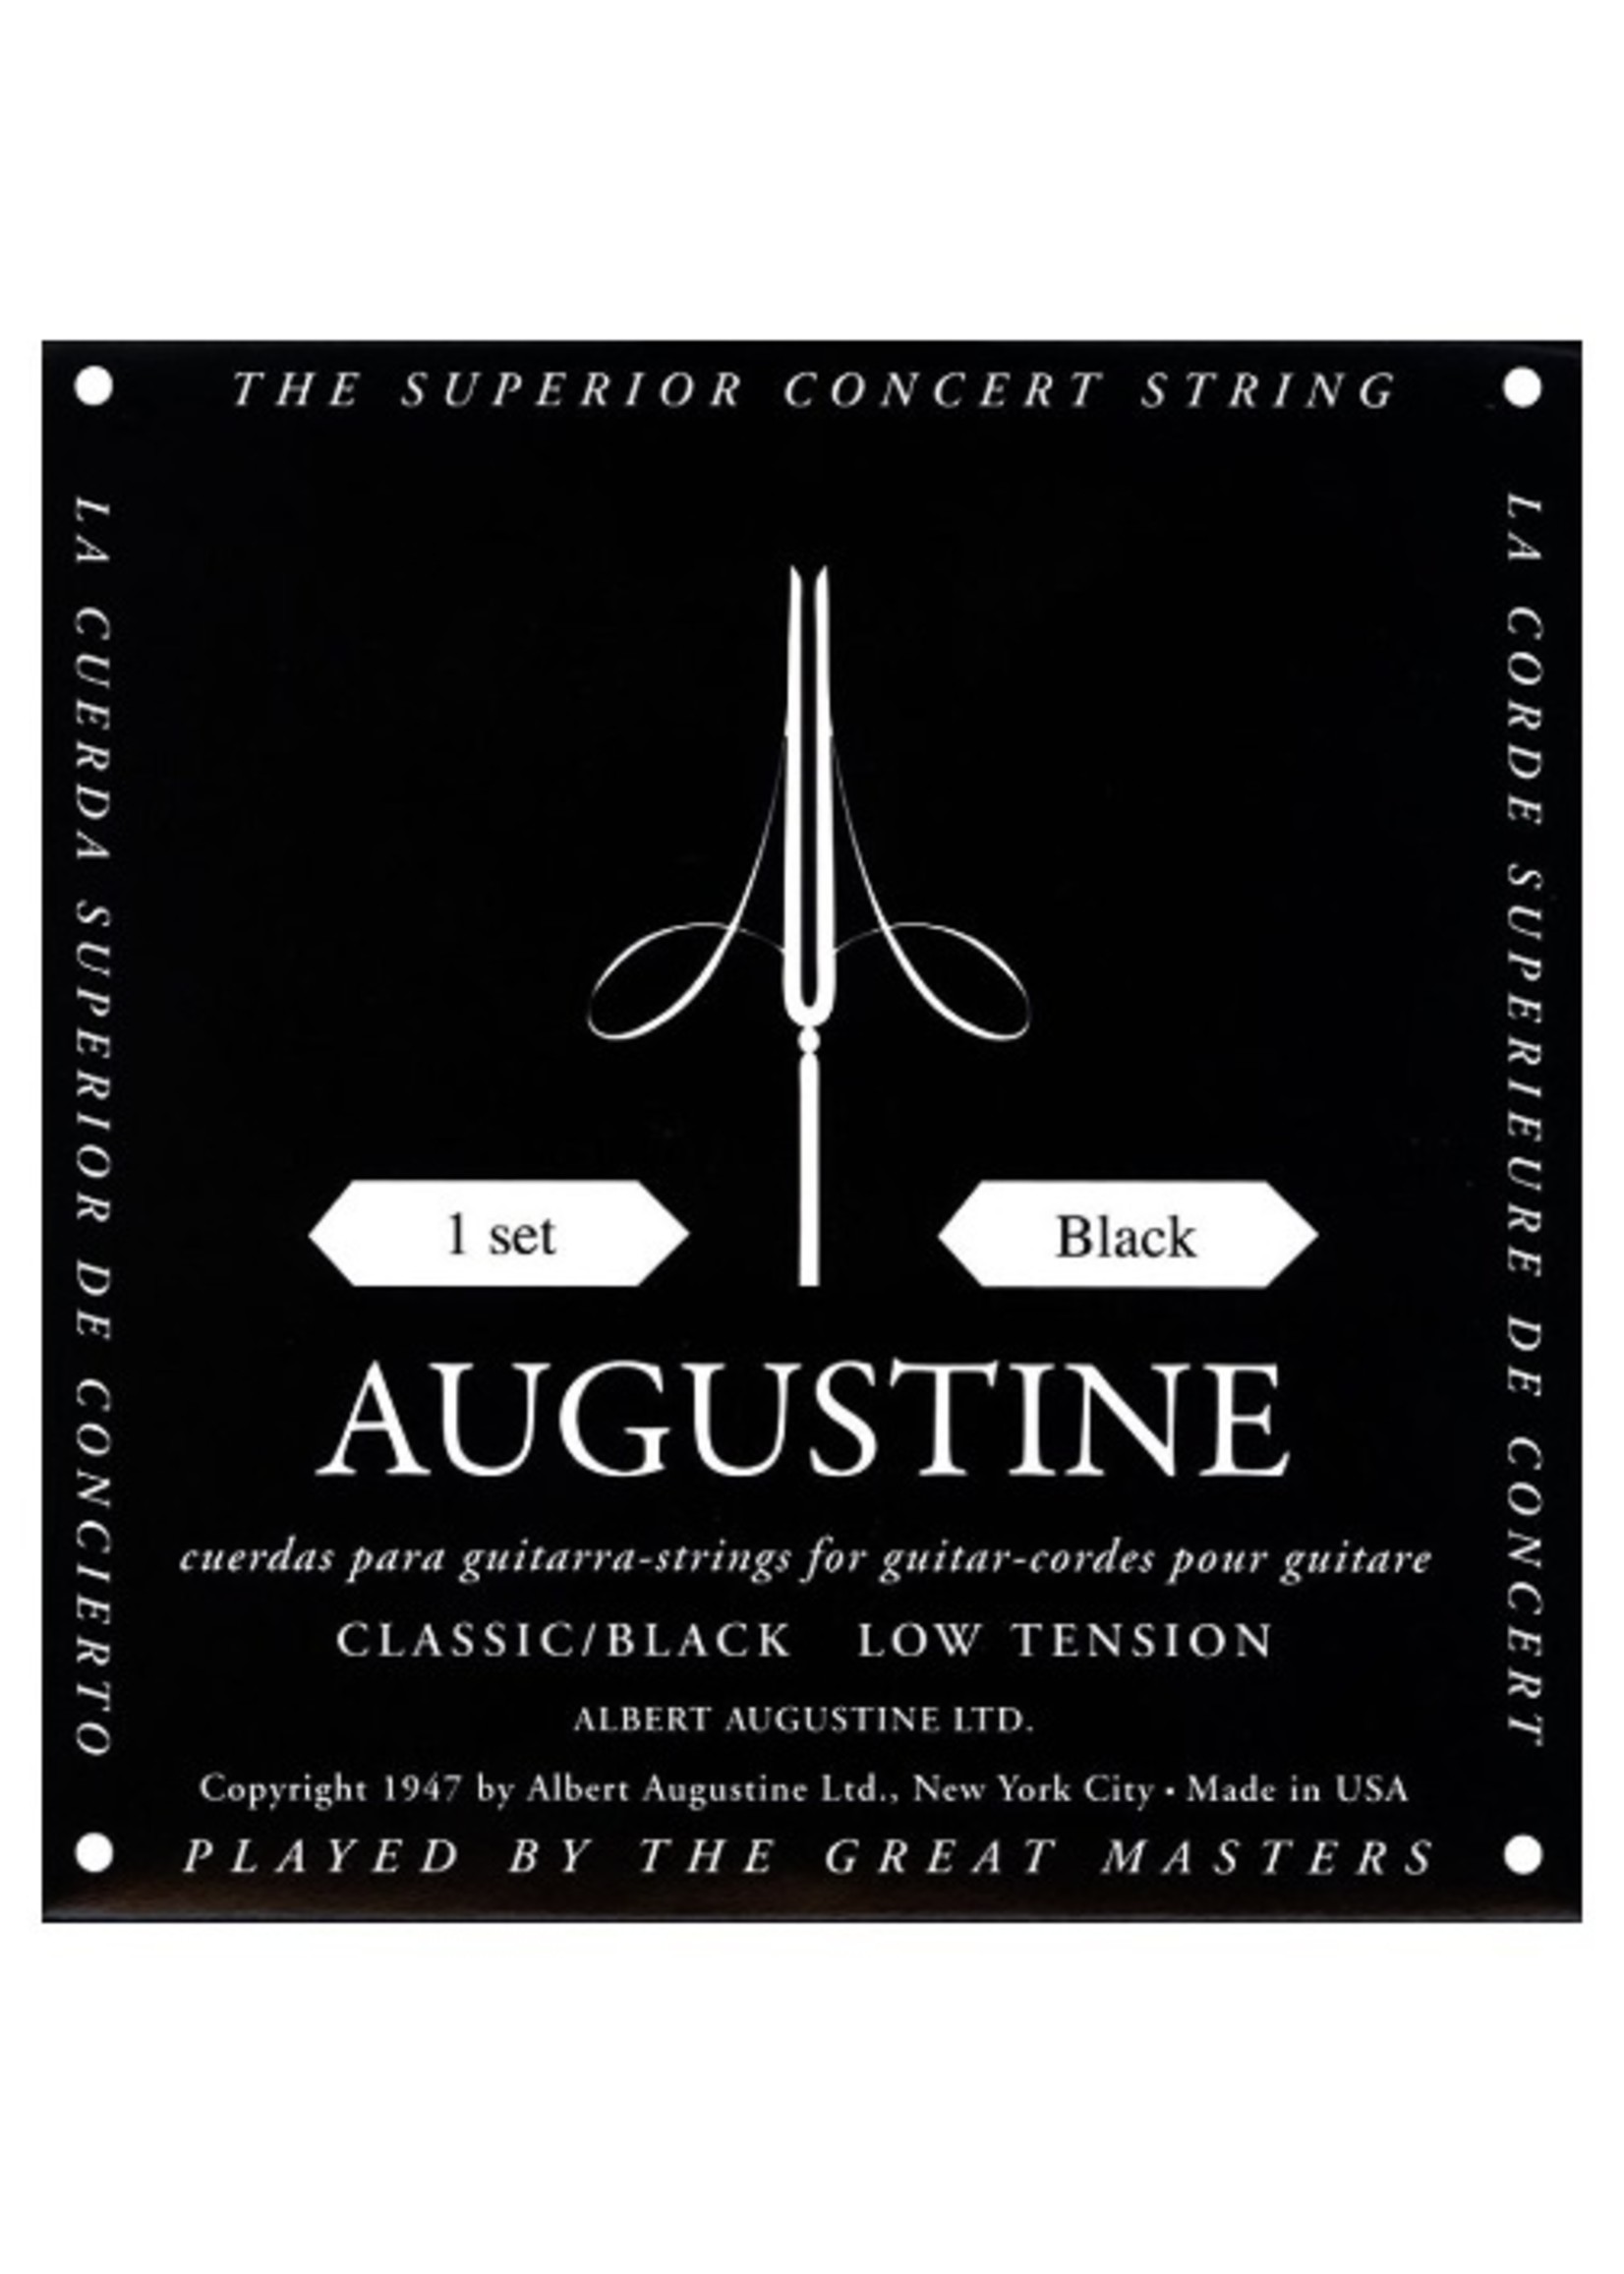 Augustine Classical Pack - Black Label Low Tension